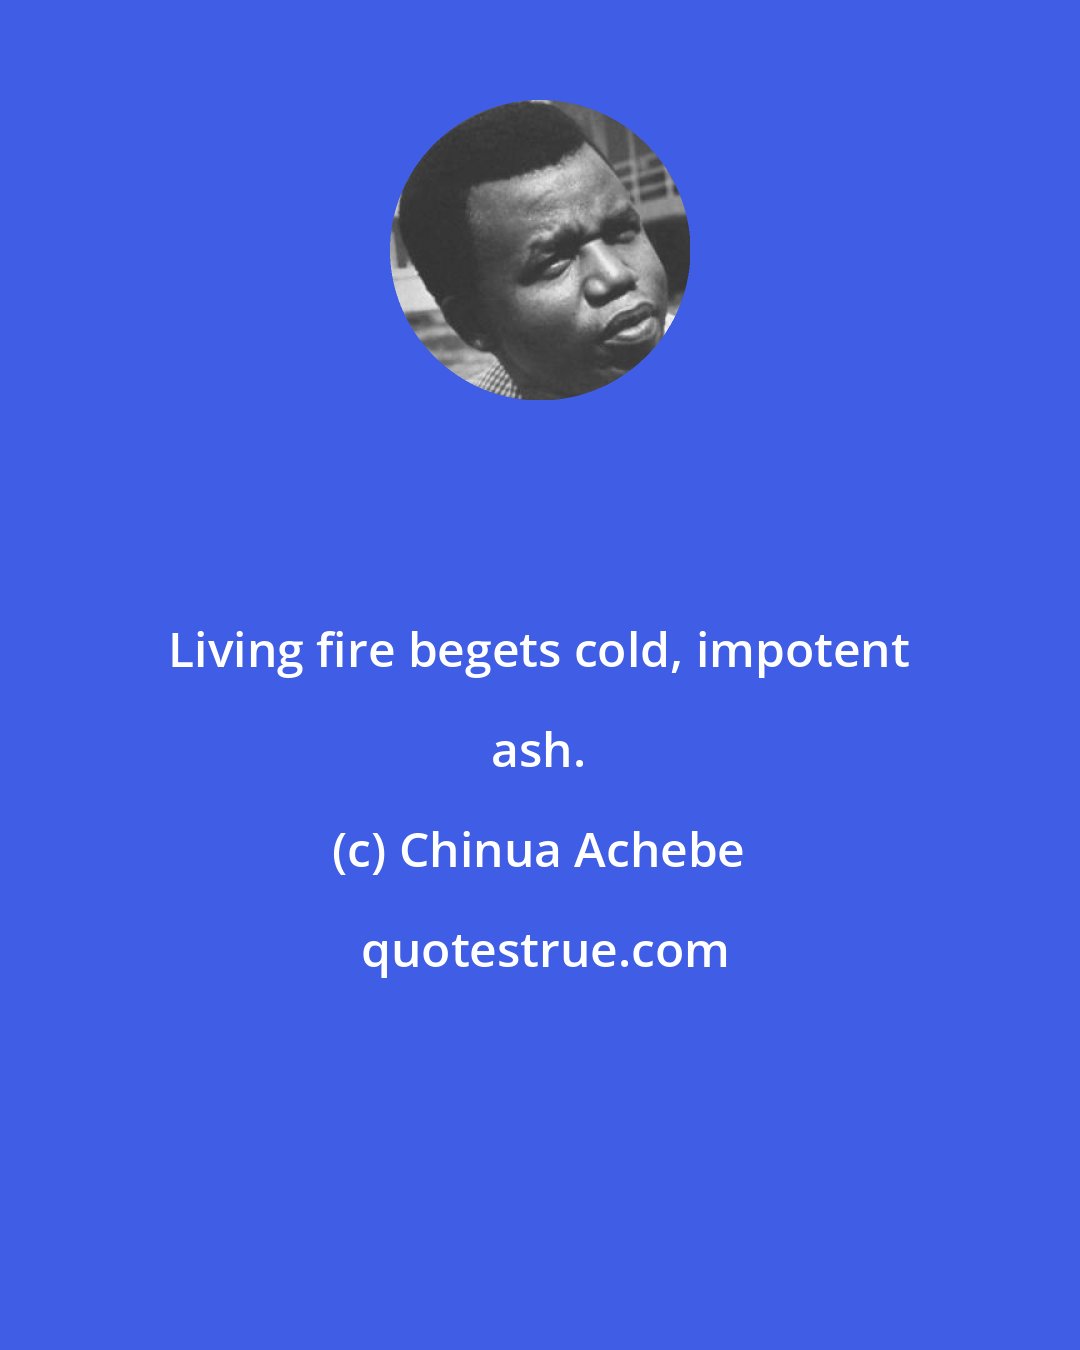 Chinua Achebe: Living fire begets cold, impotent ash.